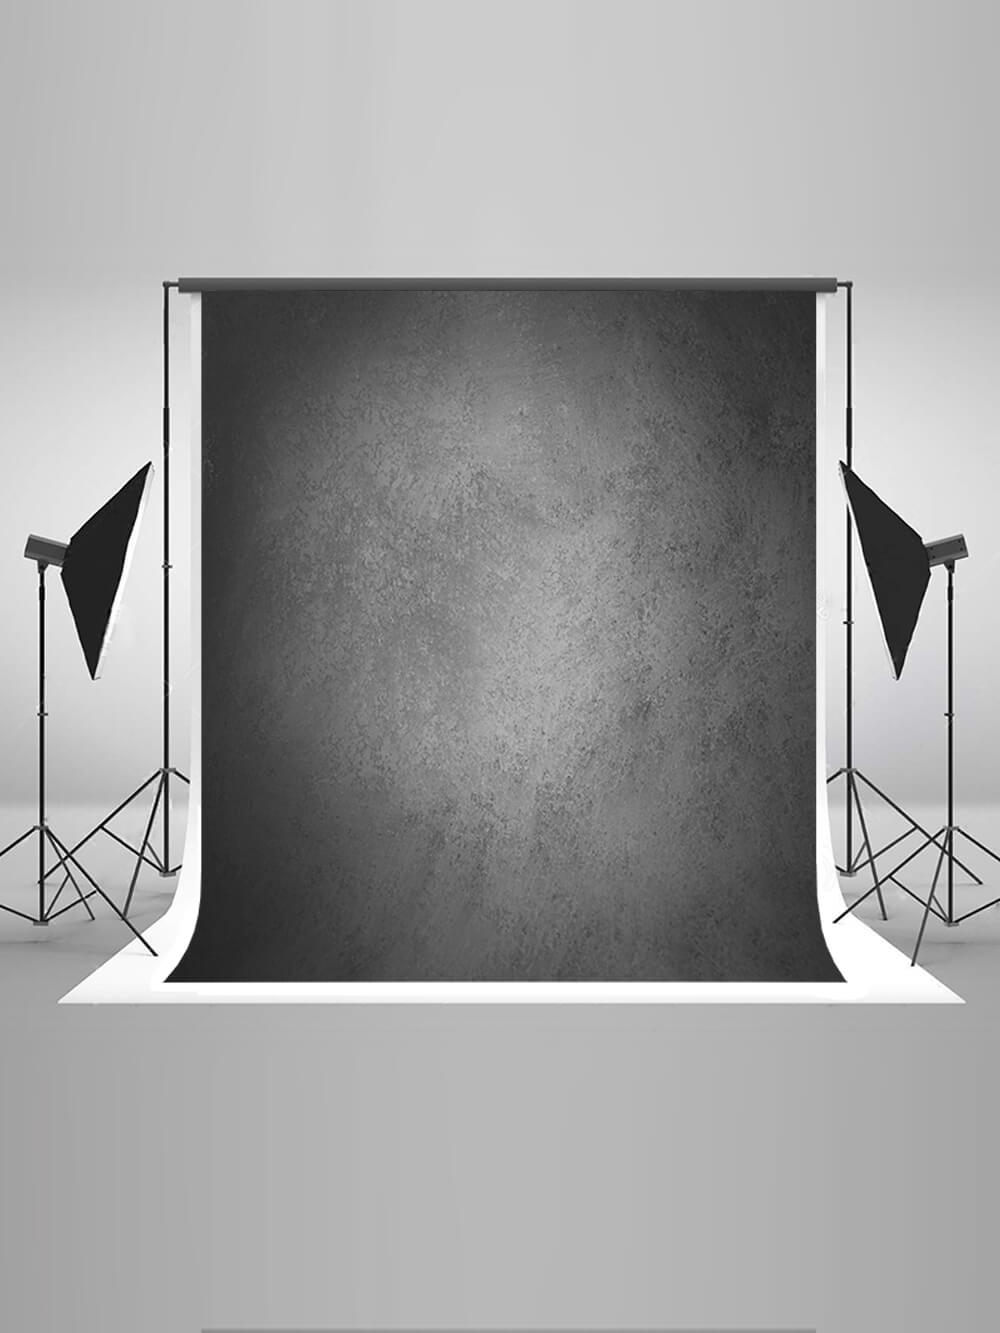 Abstract Black Gray Background General Backdrop of Photography Studio IBD-19769